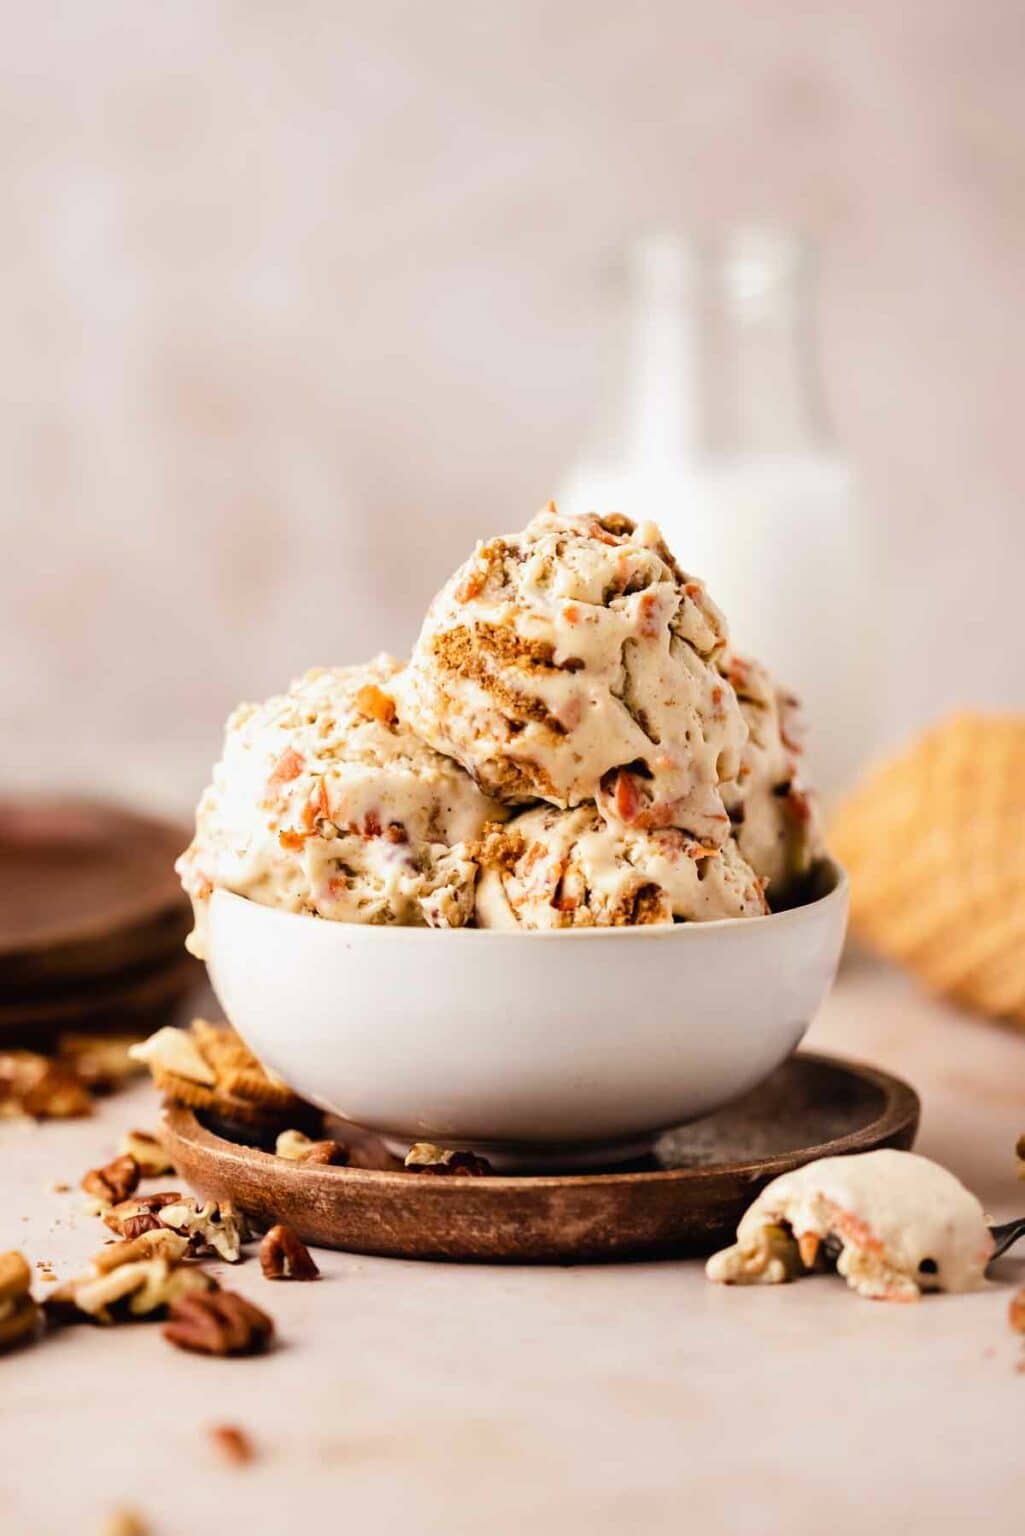 A bowl of ice cream piled high with scoops of ice cream with grated carrots and Oreo cookie pieces in them.